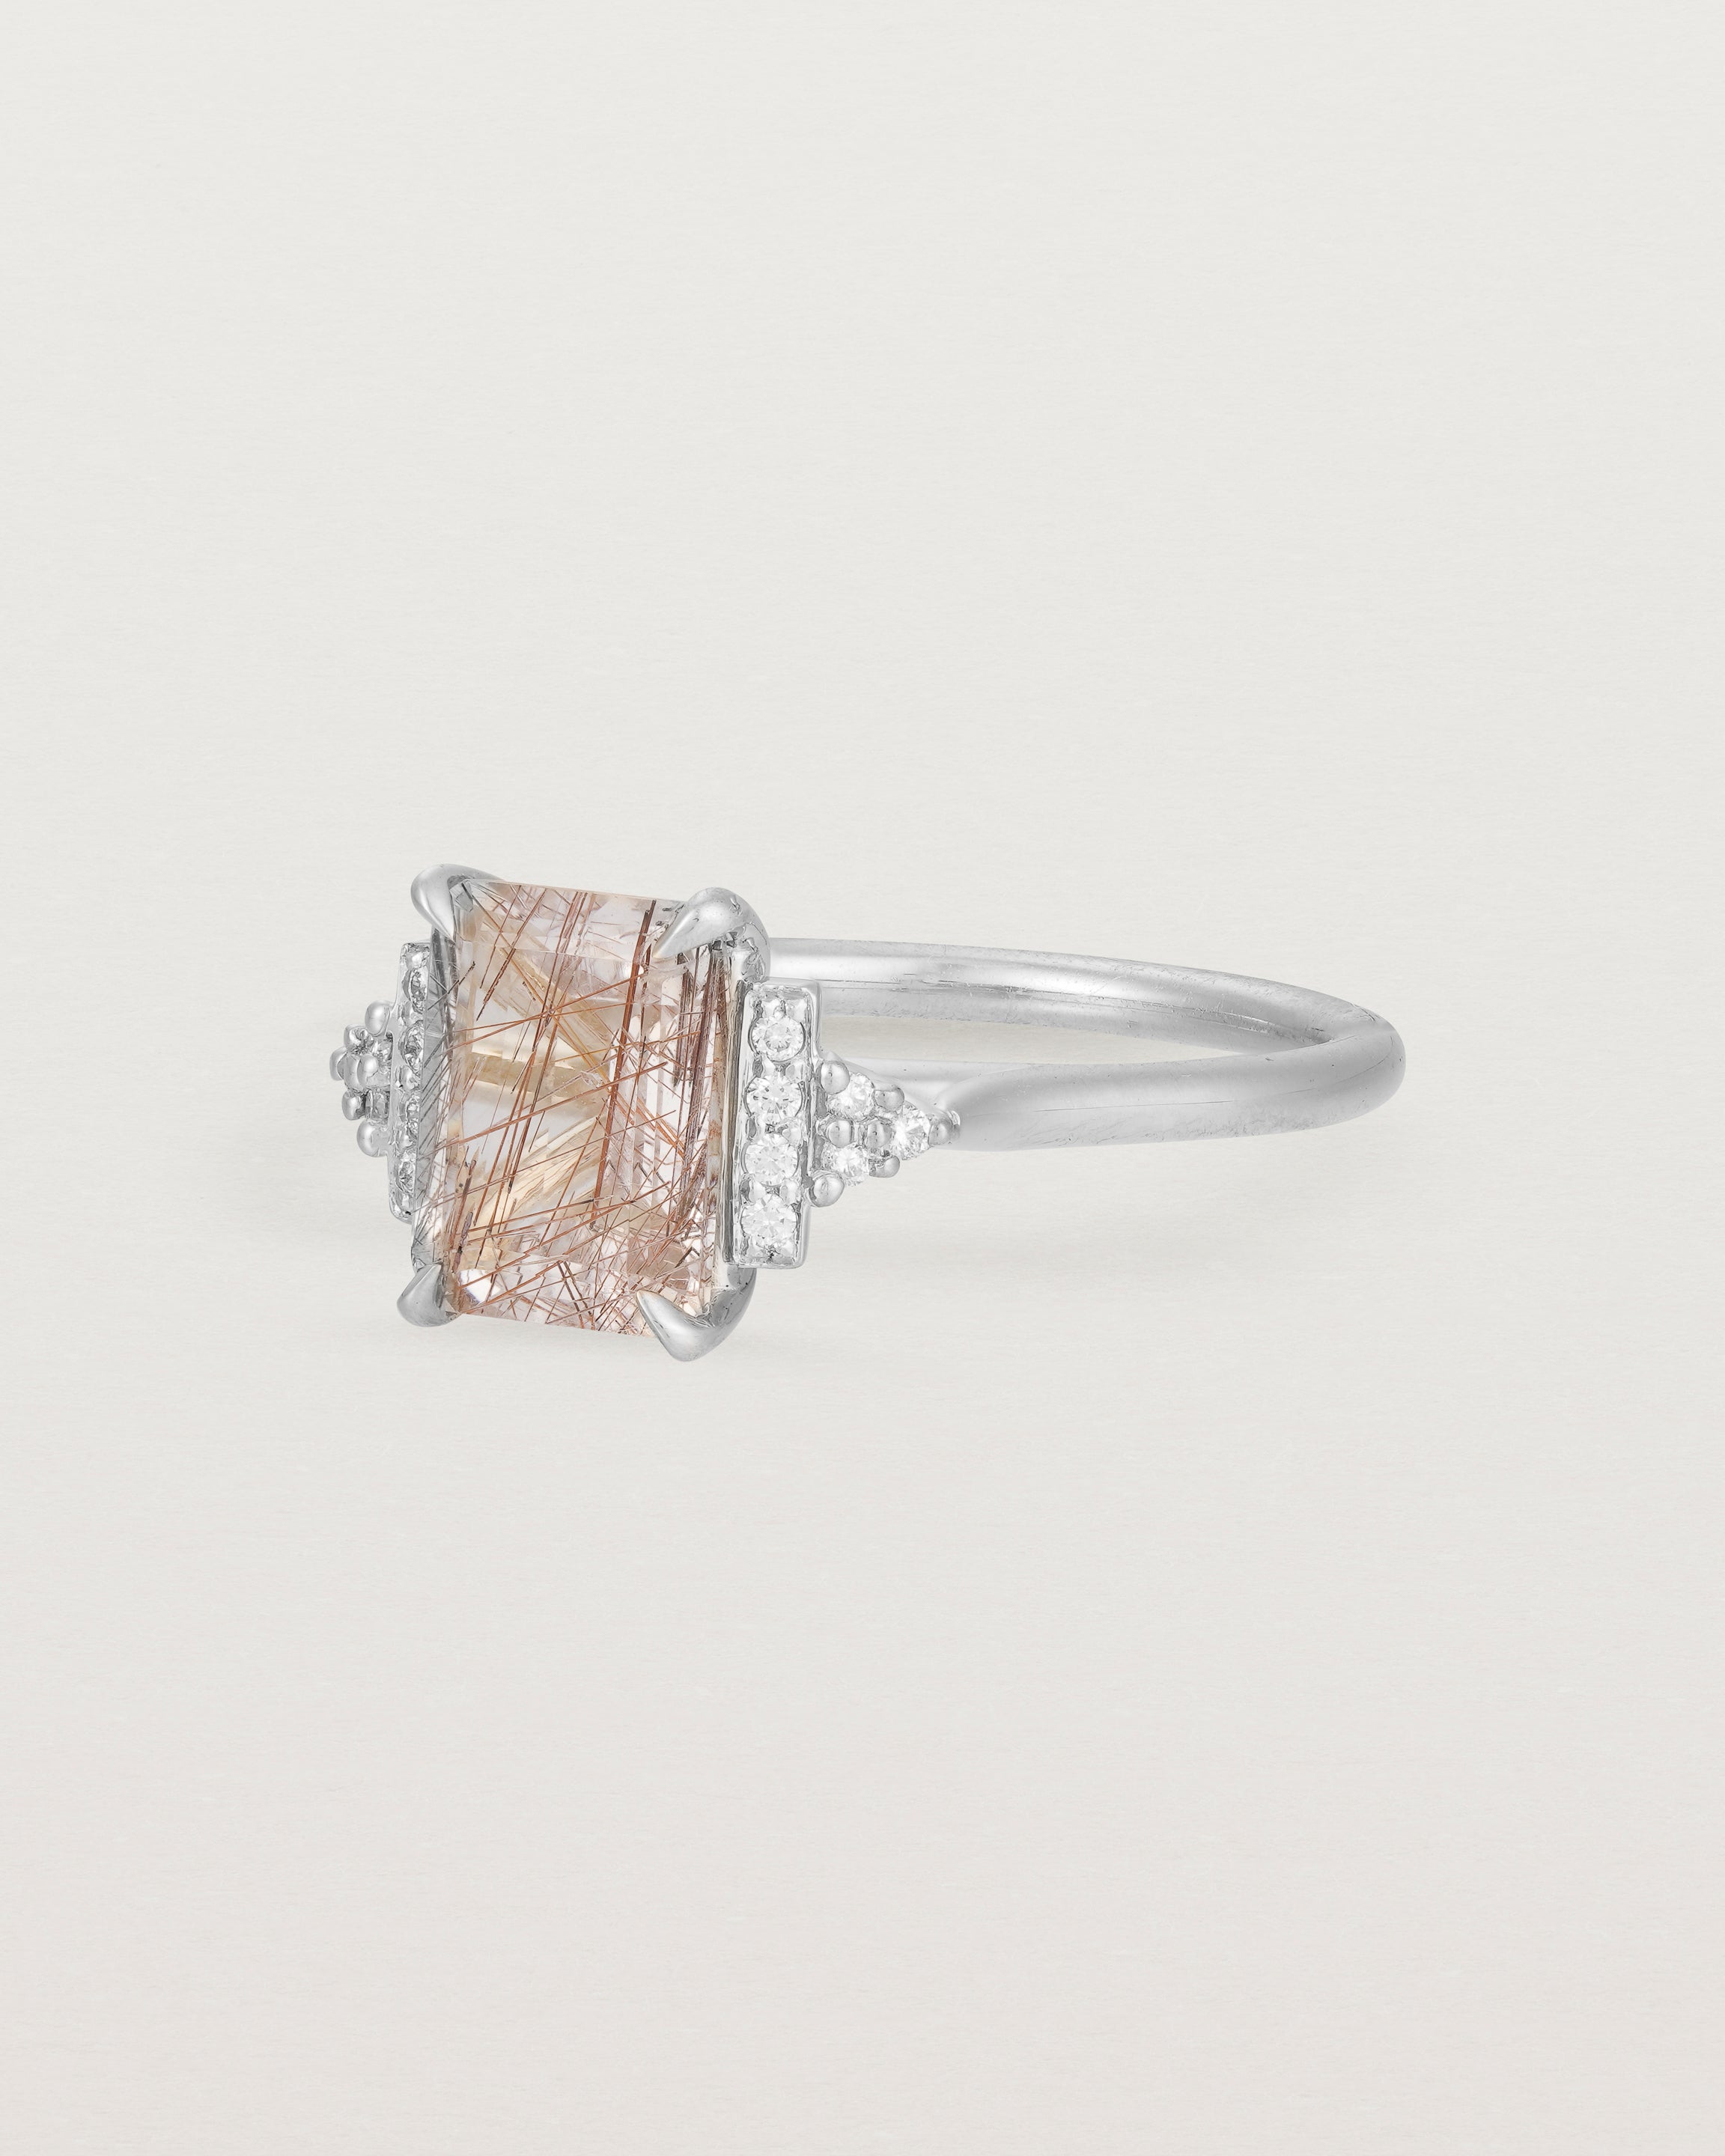 Side view of the Elodie Ring featuring a emerald cut rutilated quartz in white gold